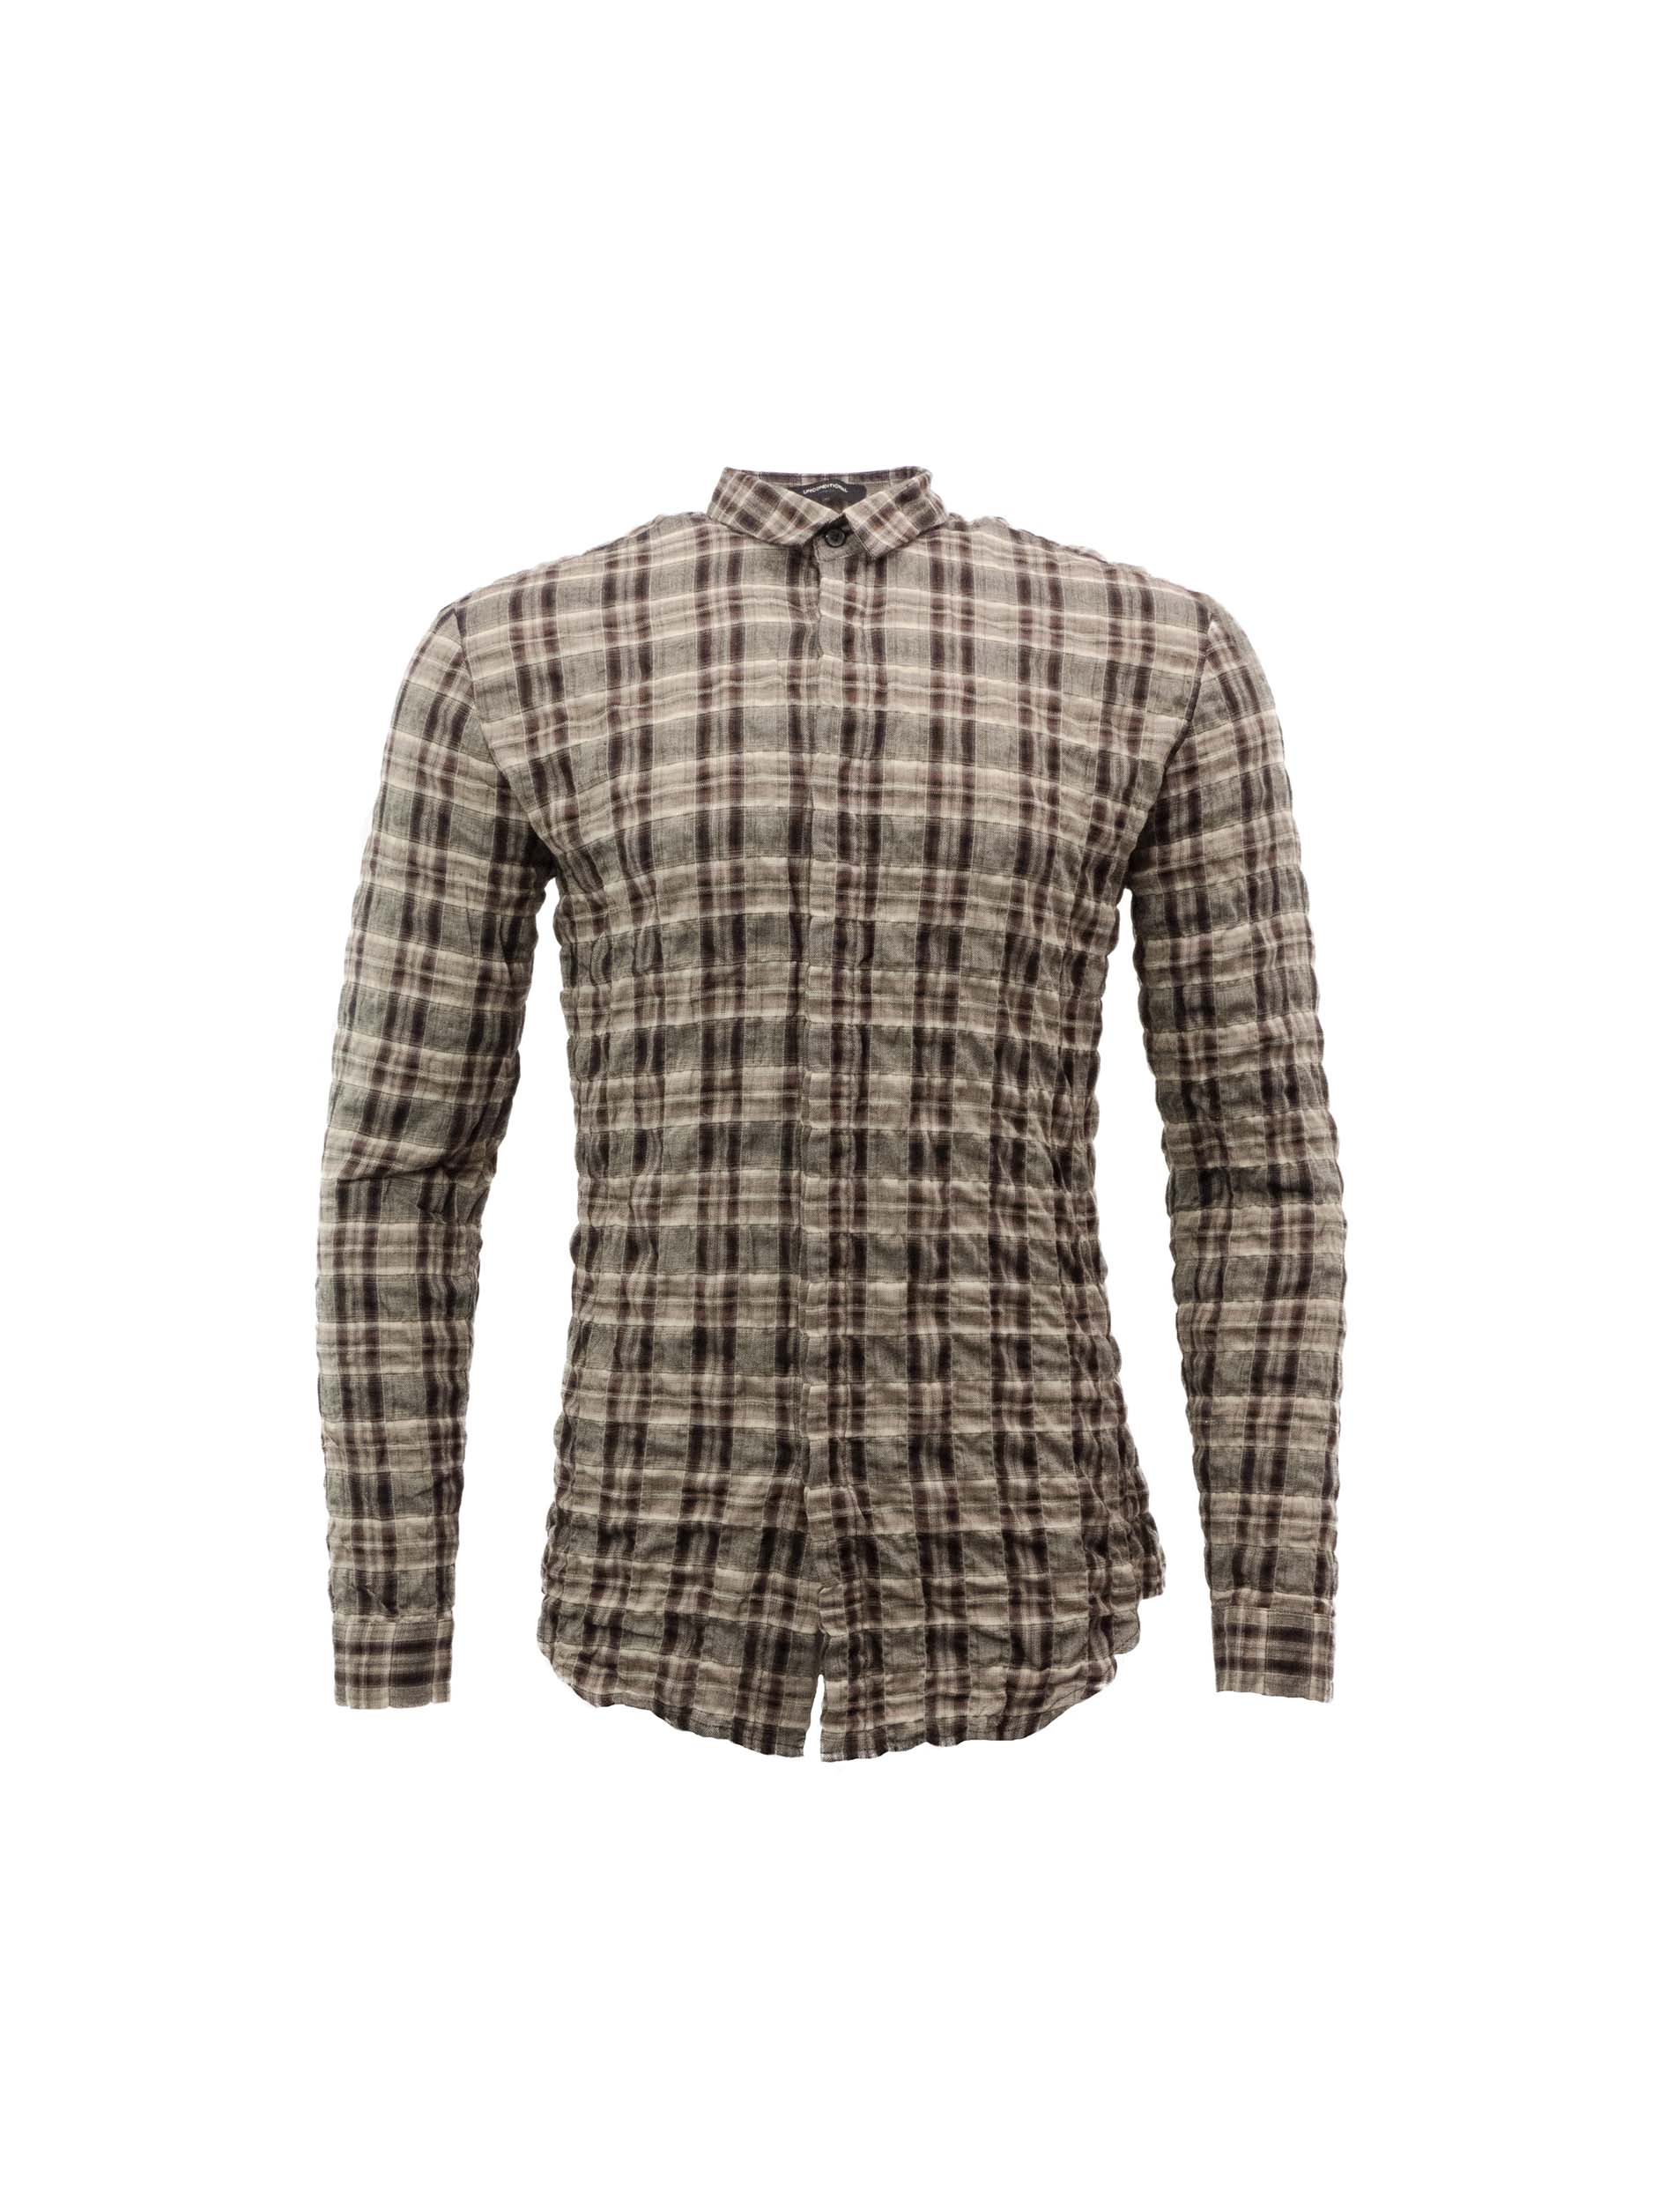 BROWN GREY CHECKED FLANNEL SHIRT